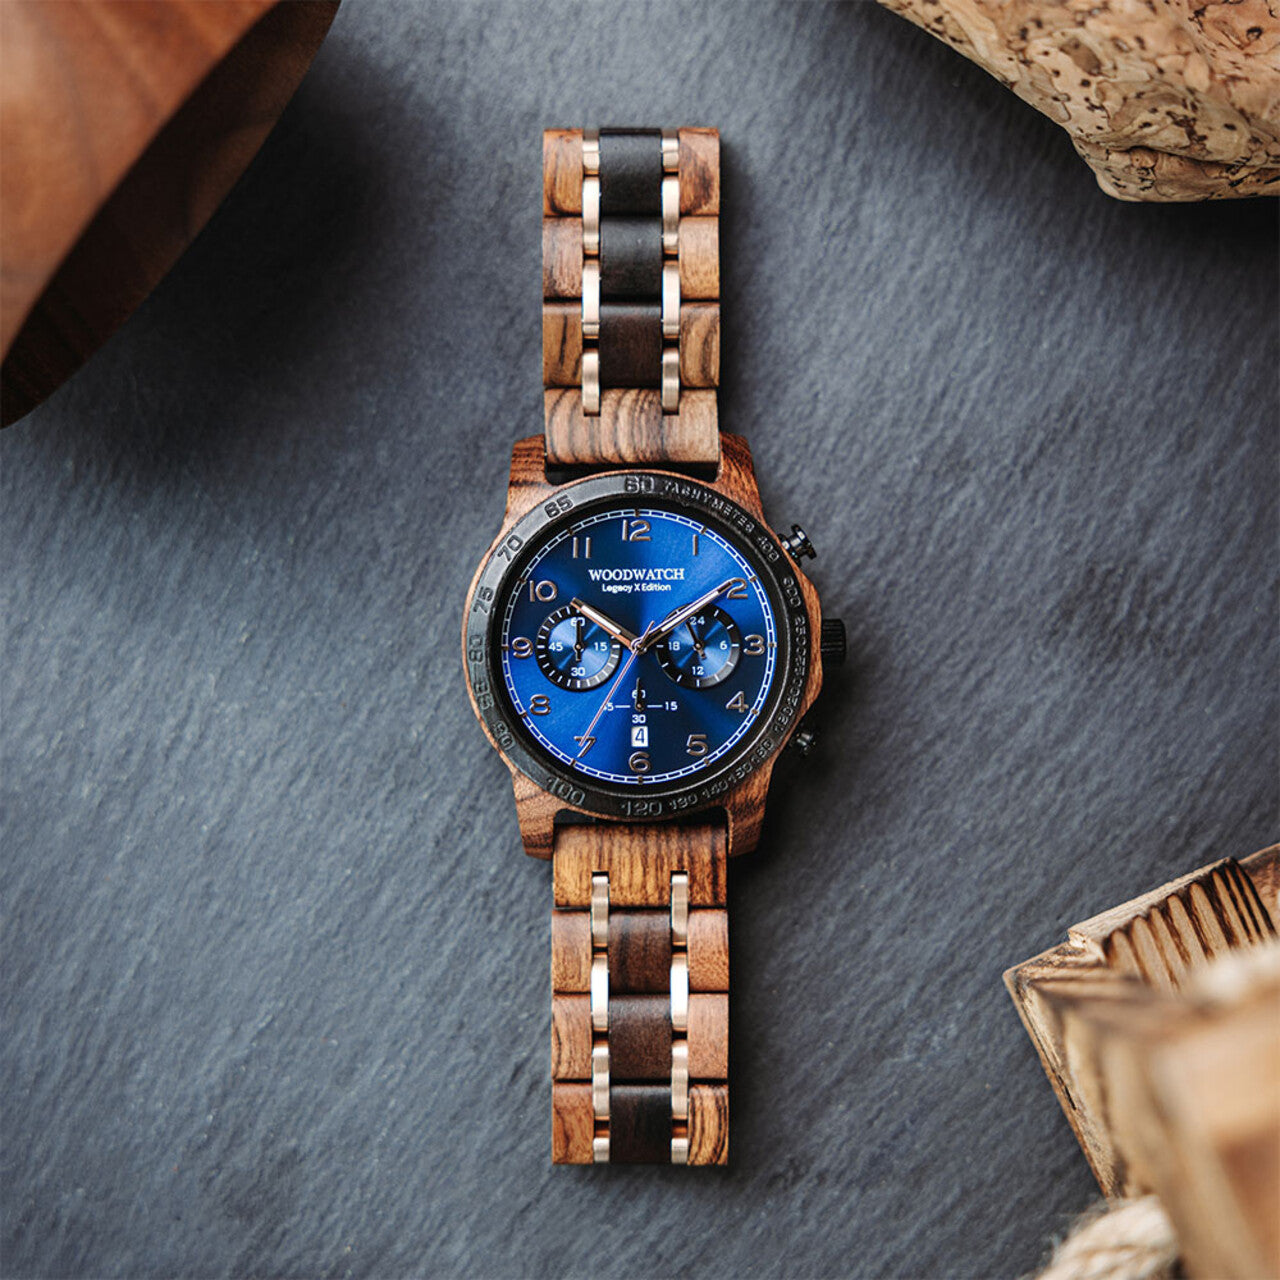 Ocean（オーシャン）- Legacy X Edition collection / WoodWatch